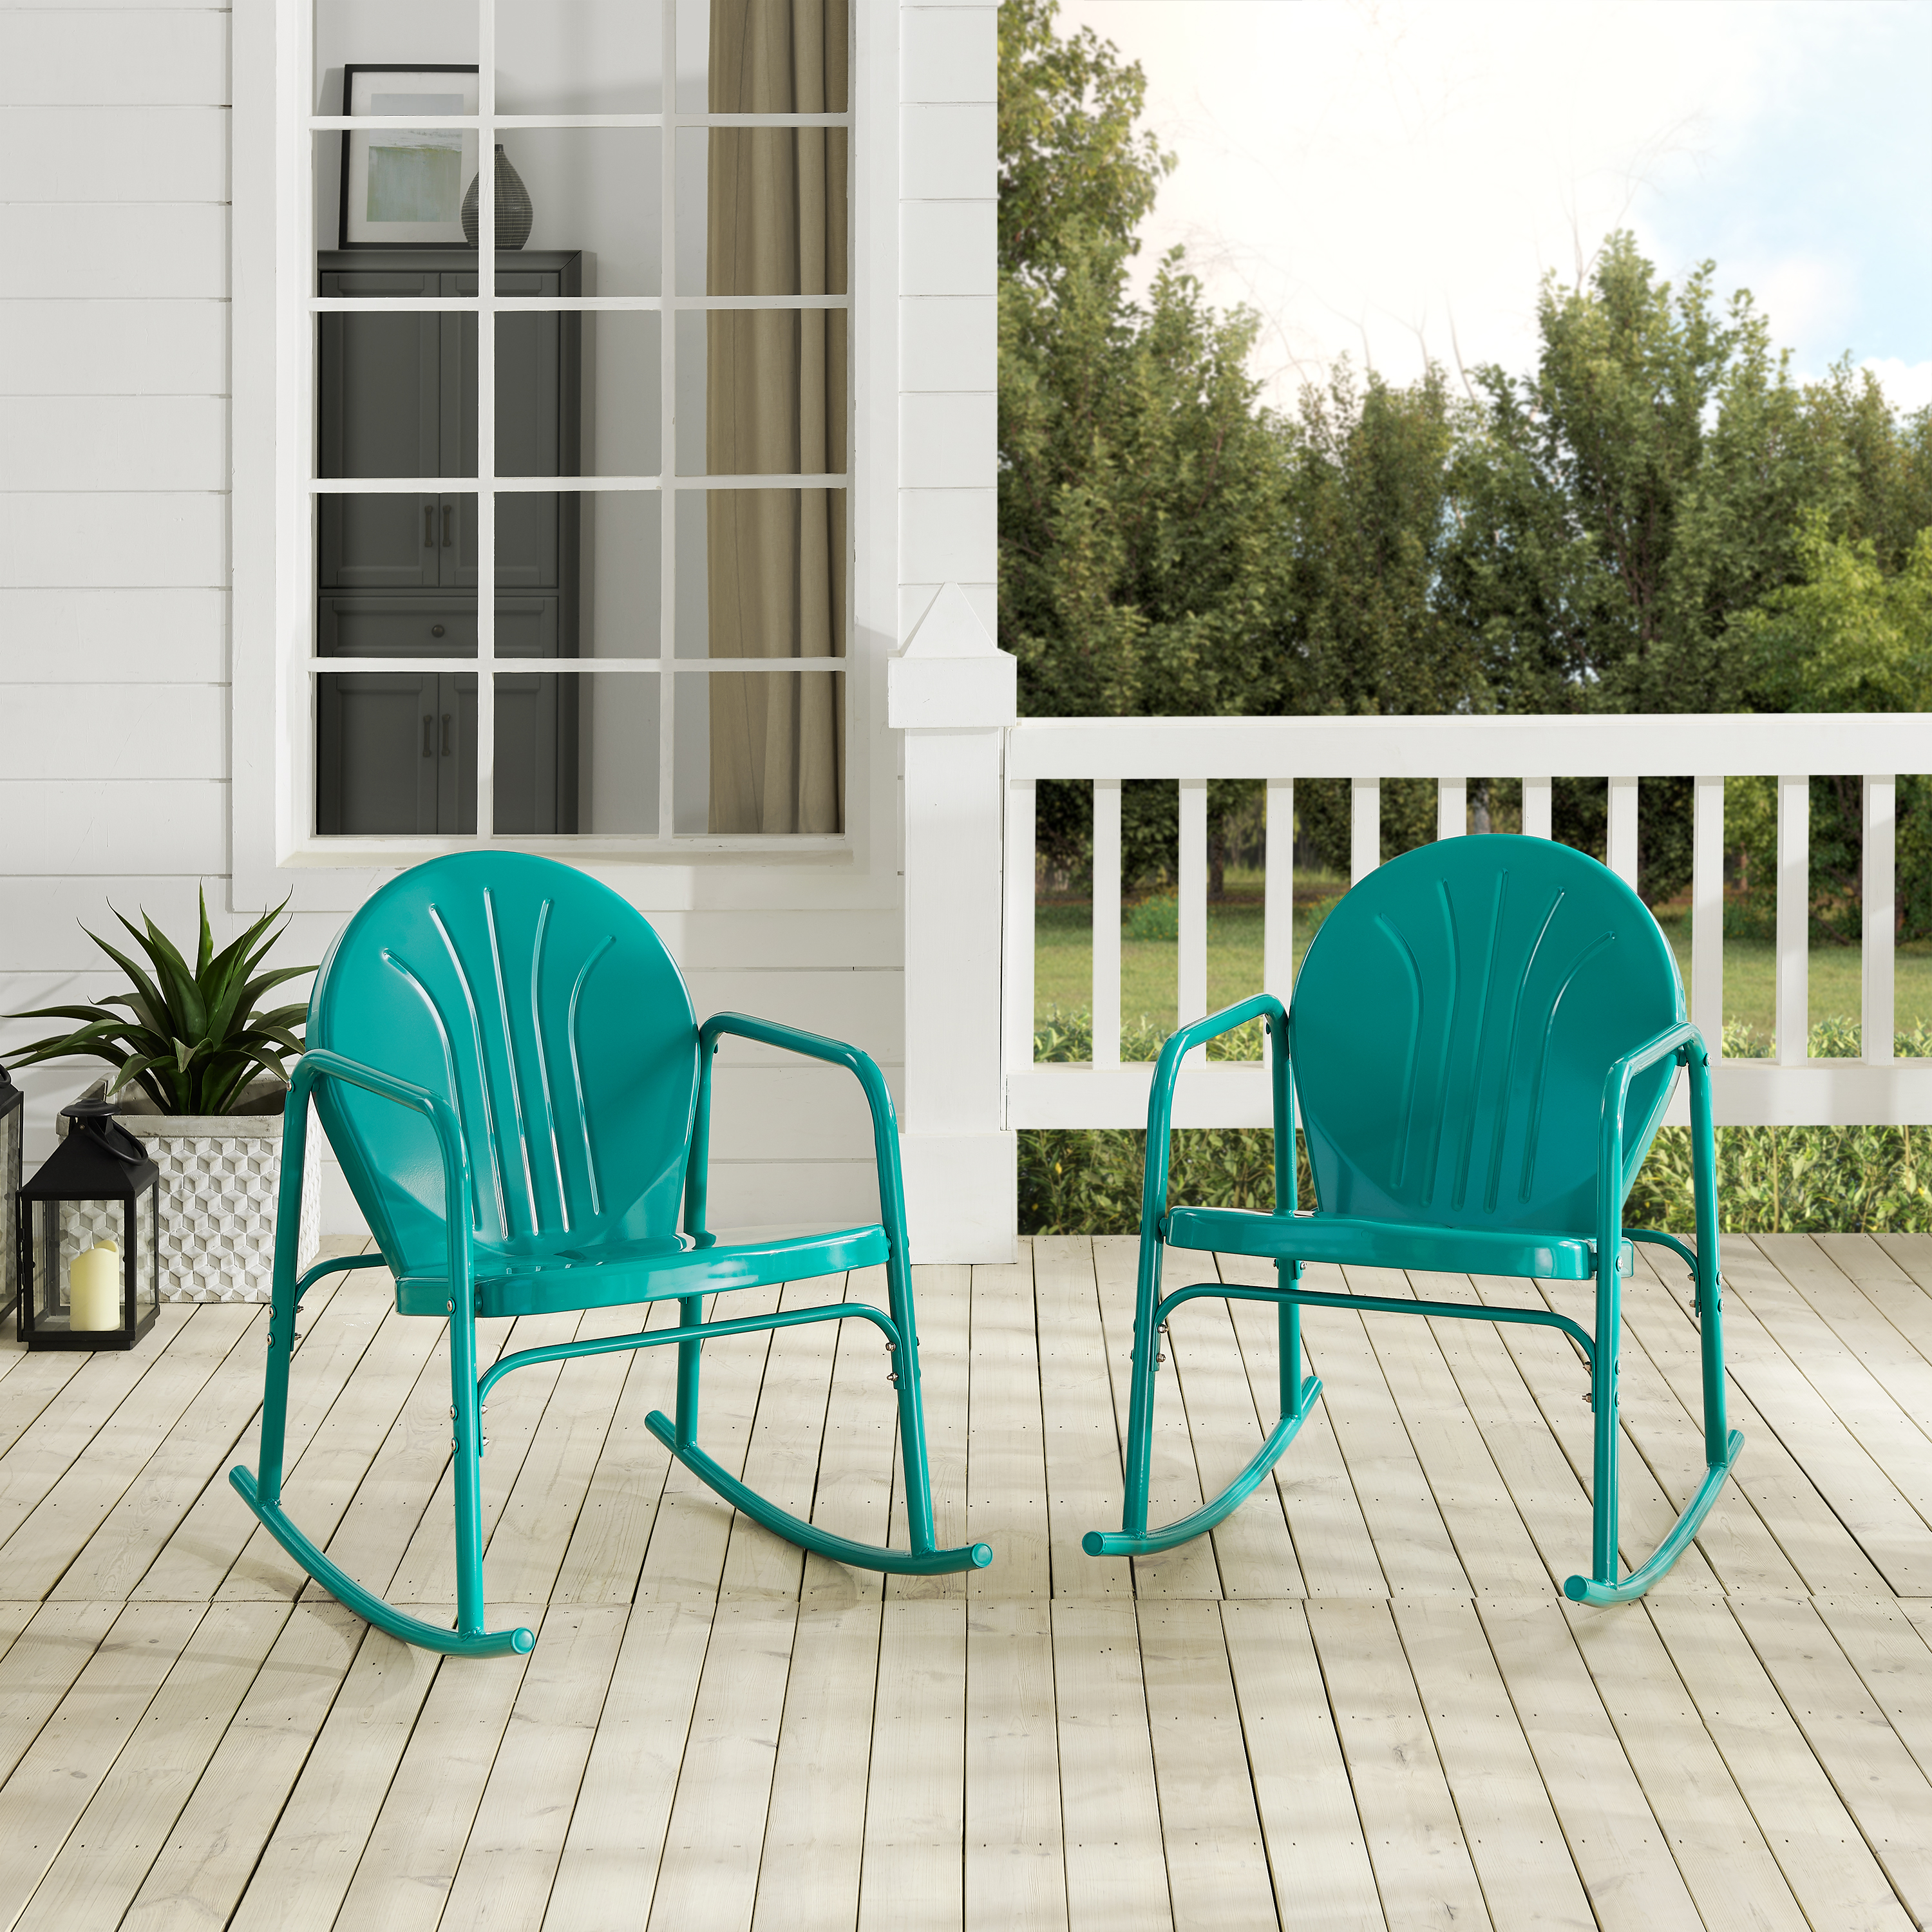 Crosley Furniture Griffith 2Pc Outdoor Powder Coated Rocking Chair Set, 2 Chairs, Green - image 4 of 13